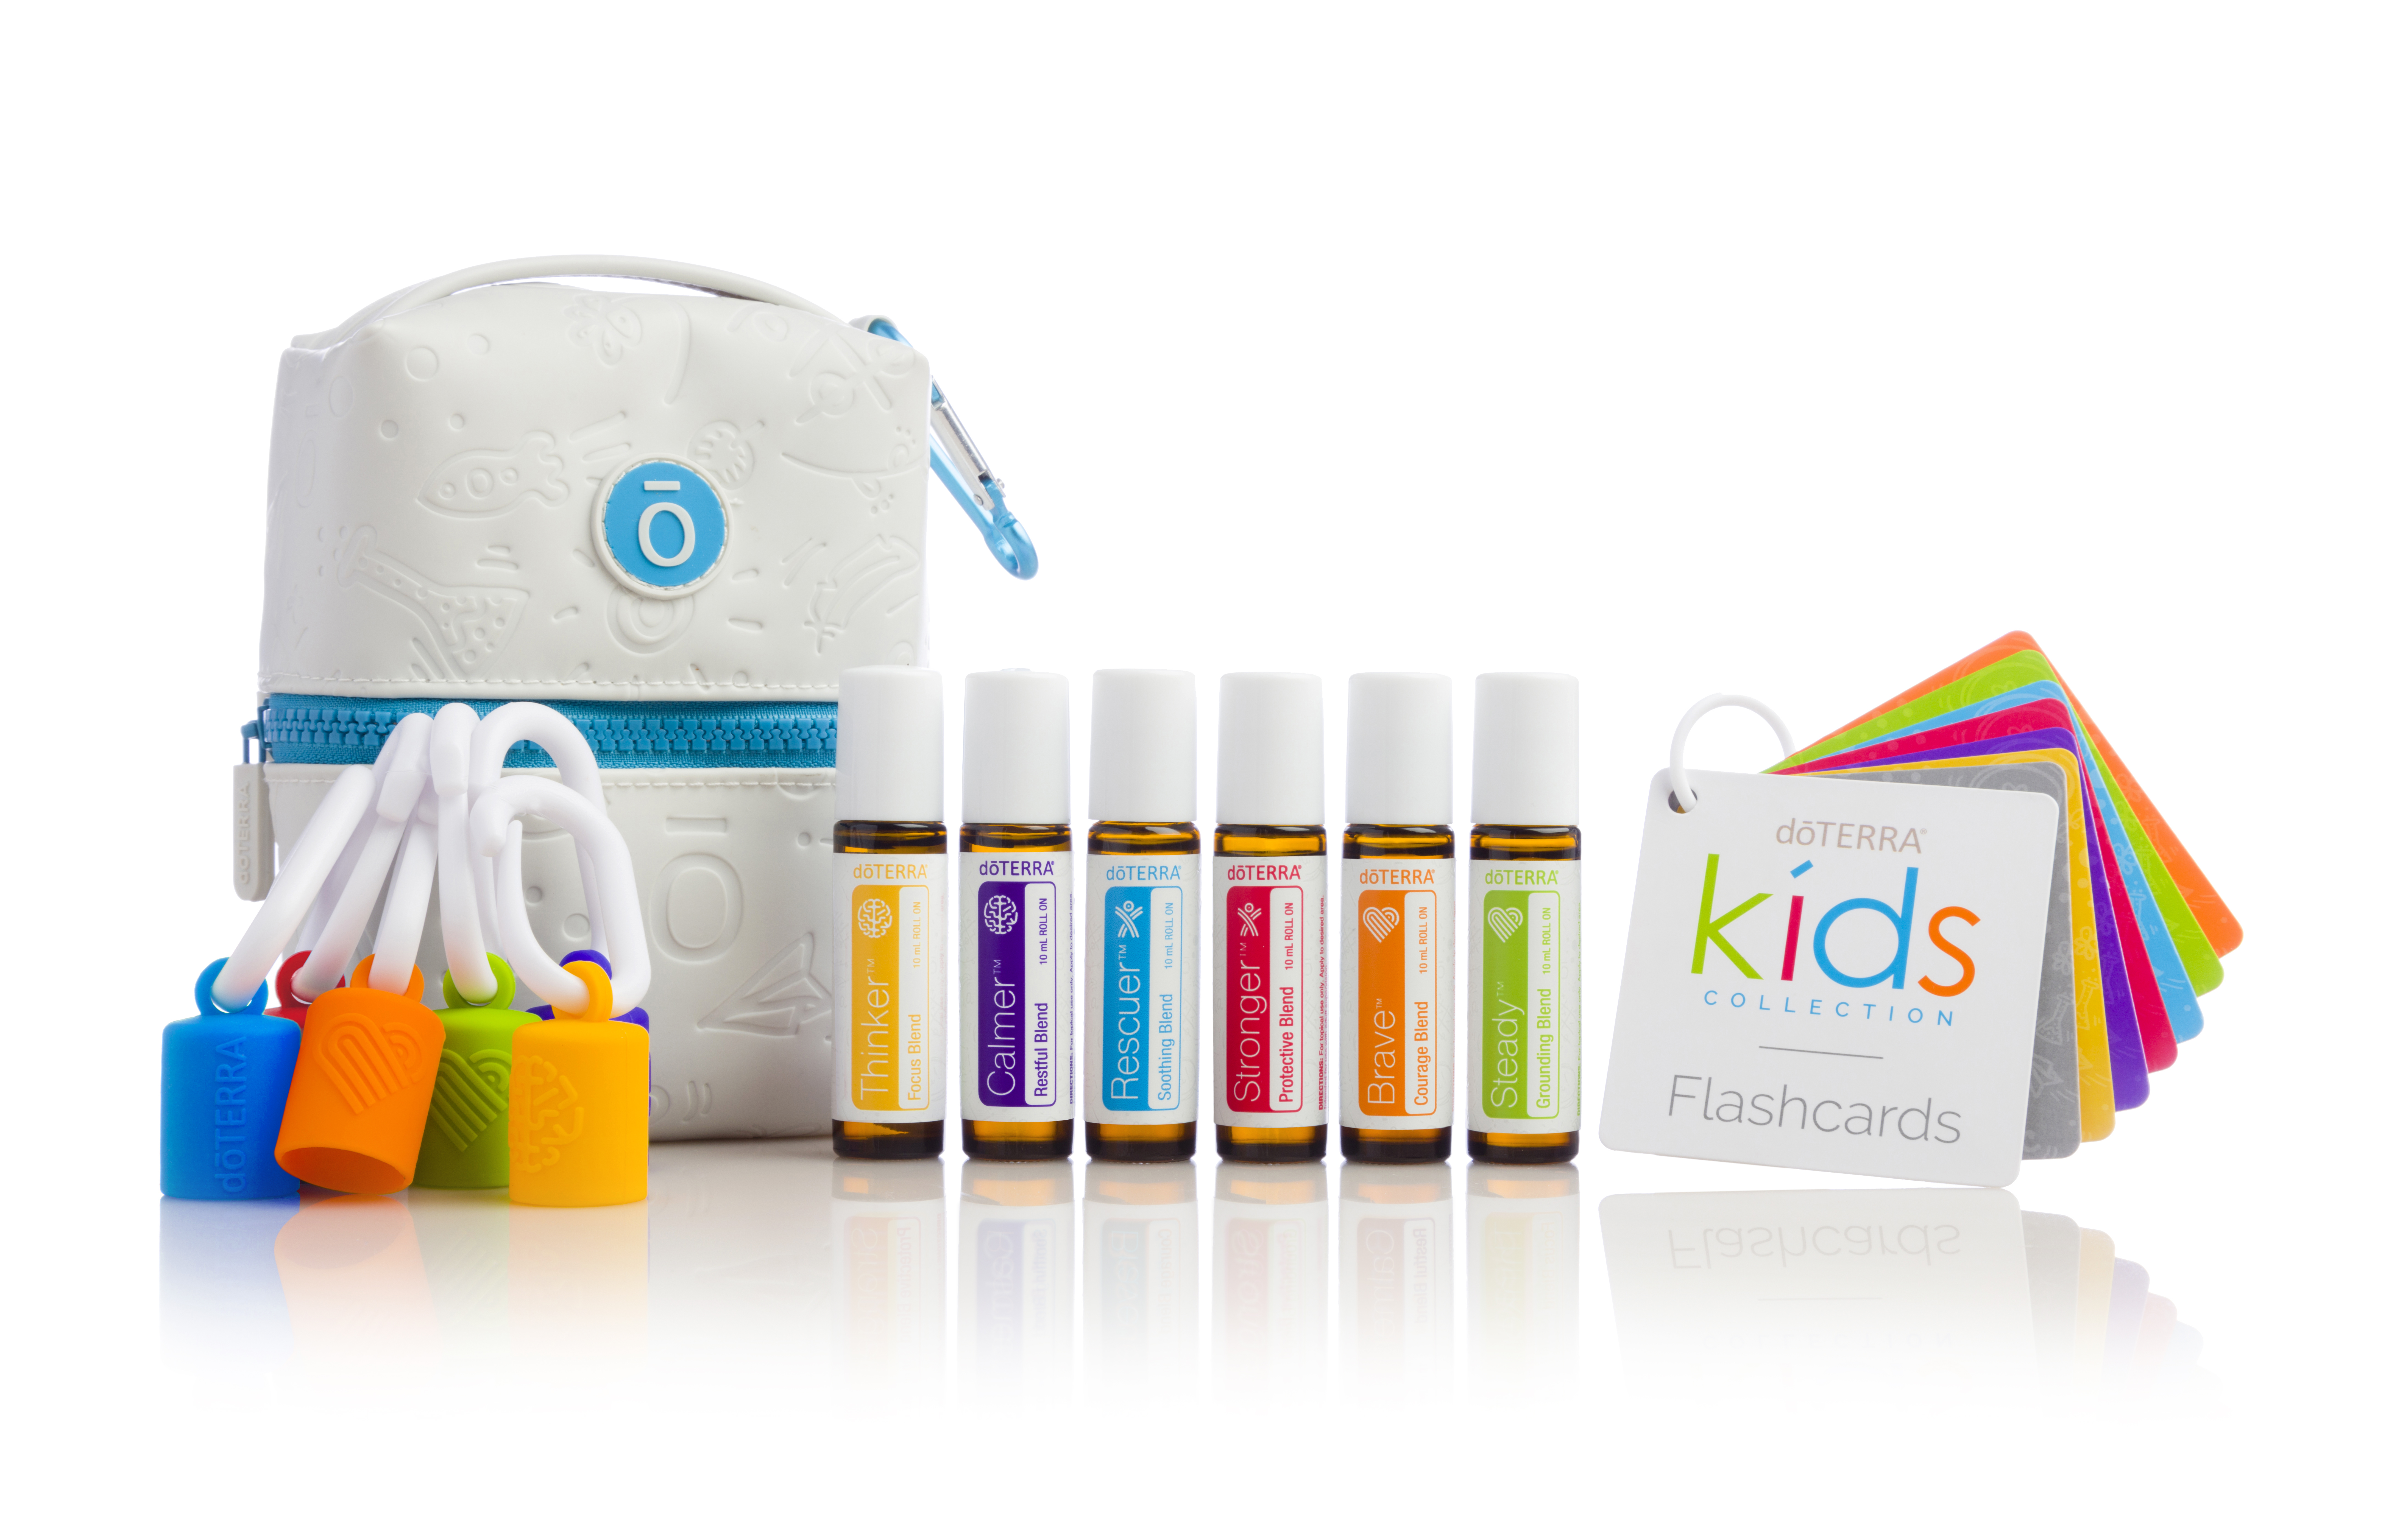 doTERRA kids collection to help focus reluctant readers.